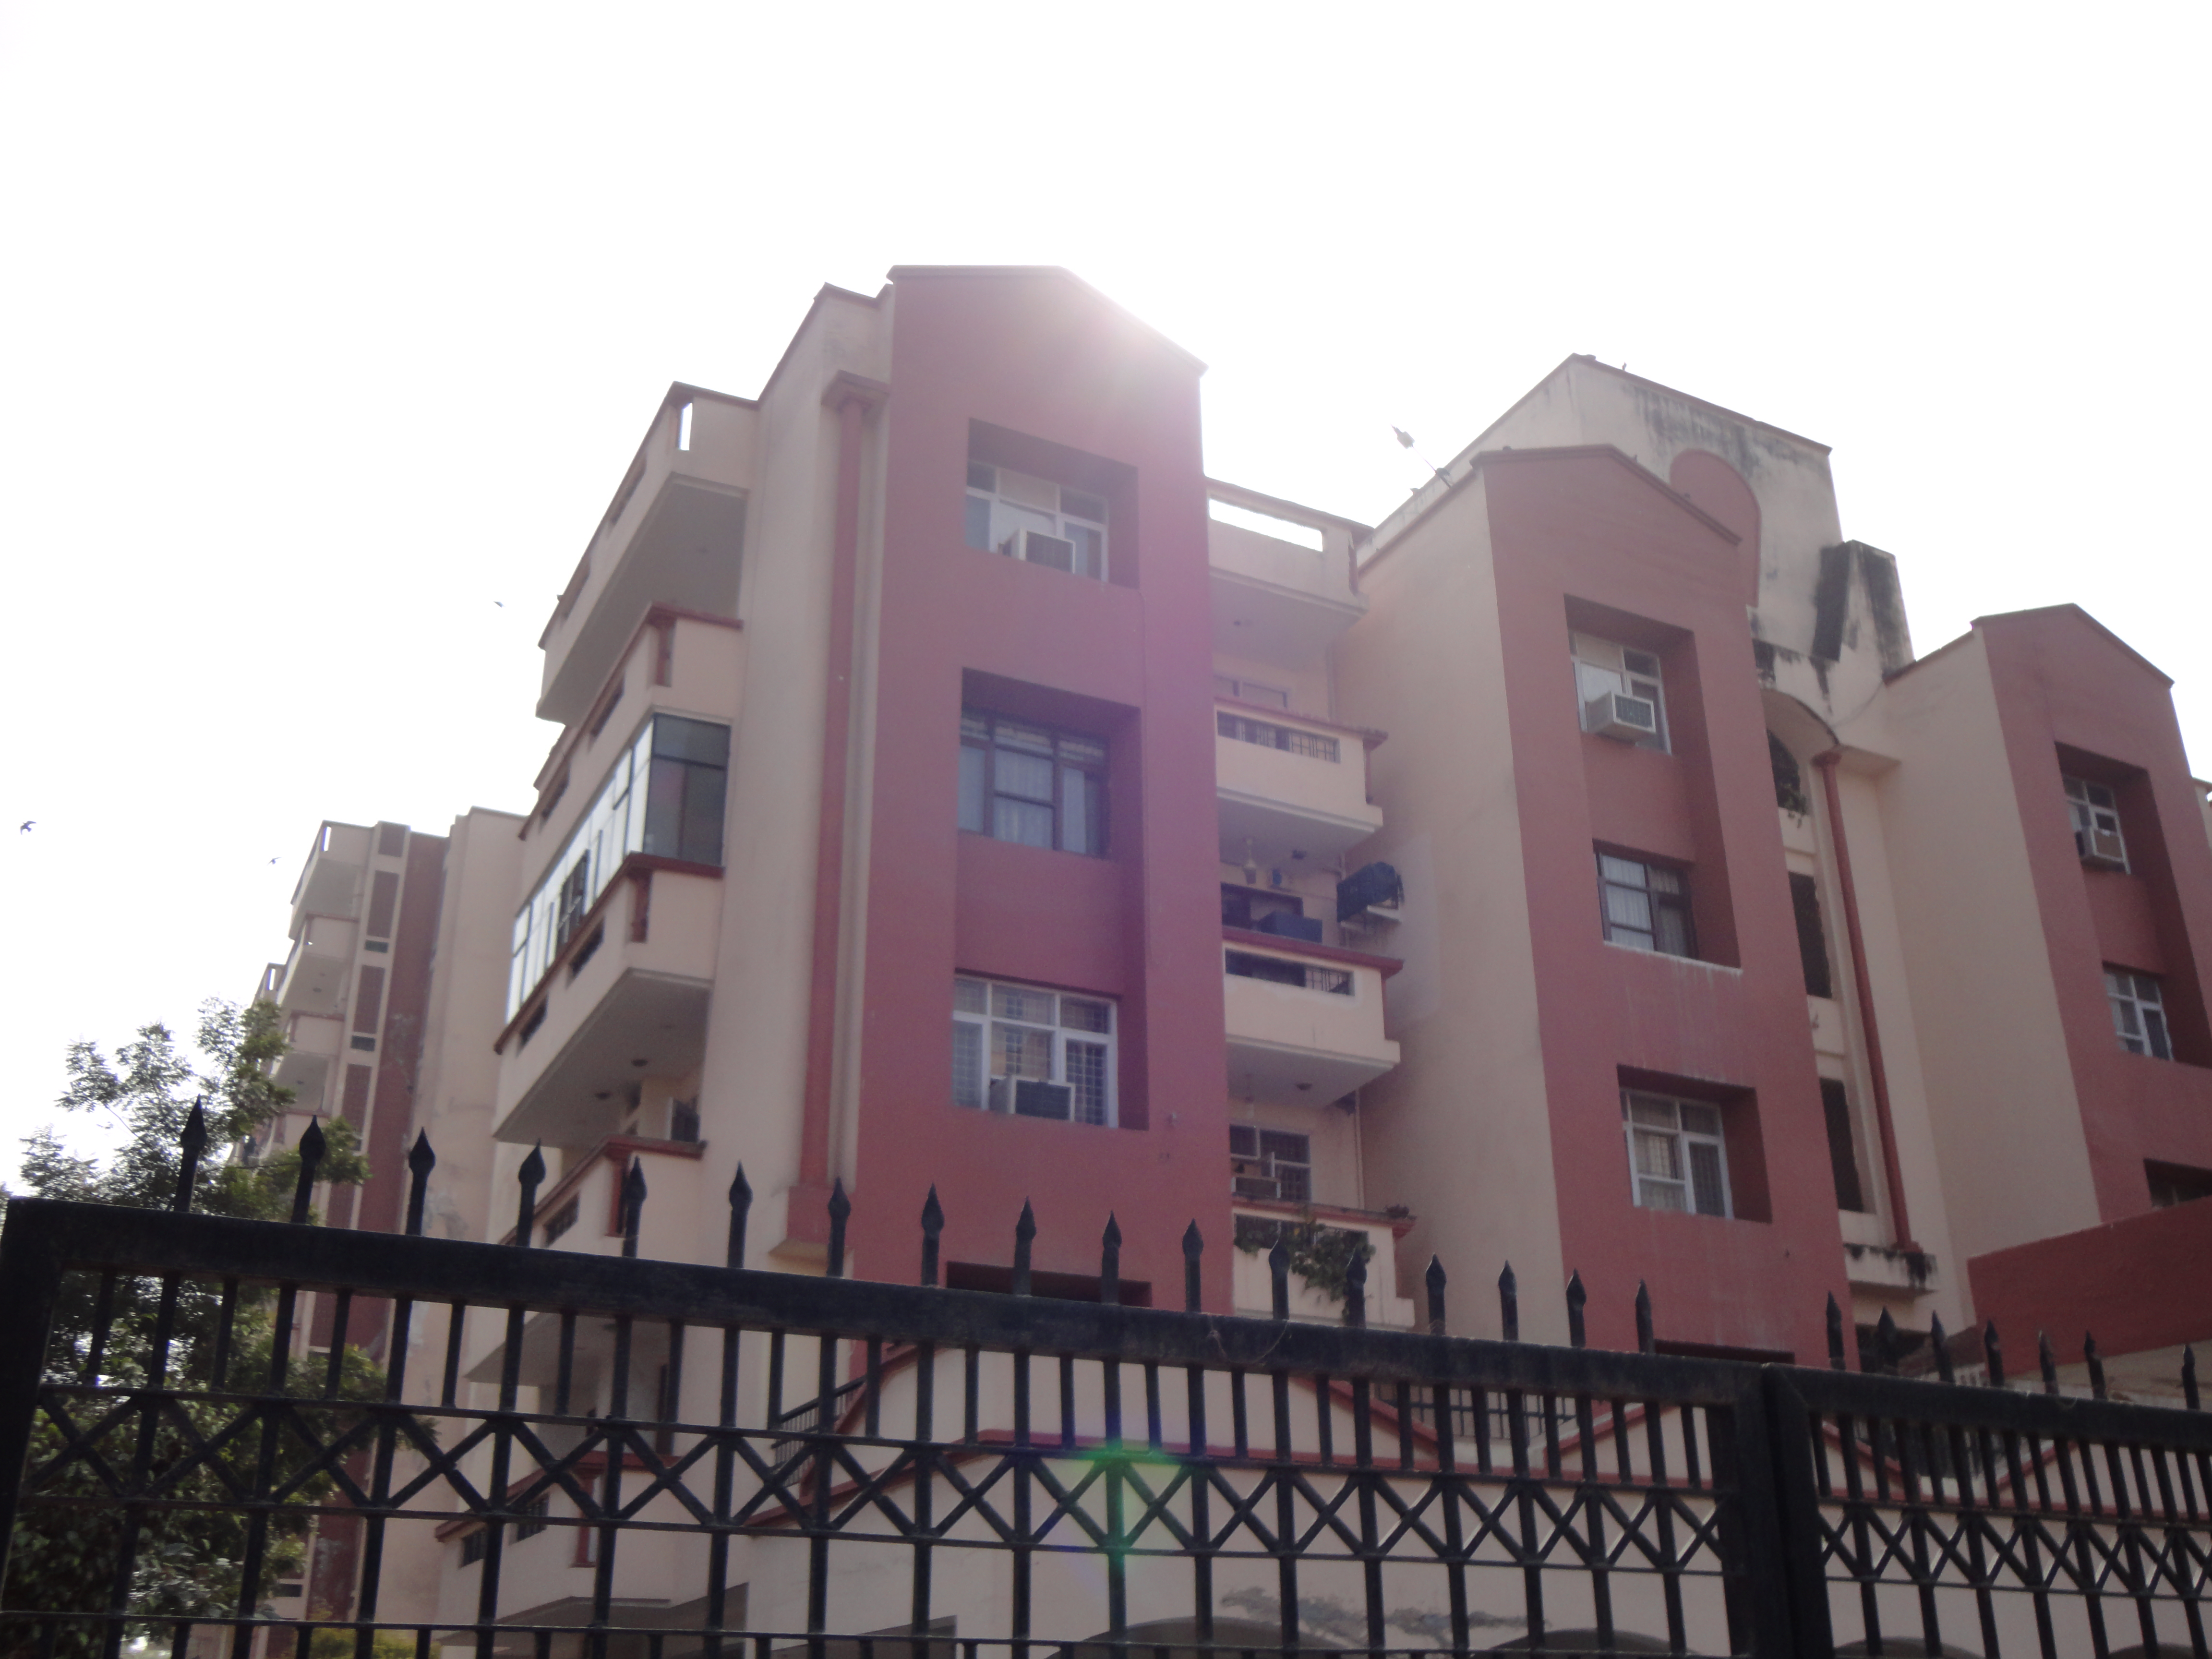 The Arihant Apartments CGHS Project Deails